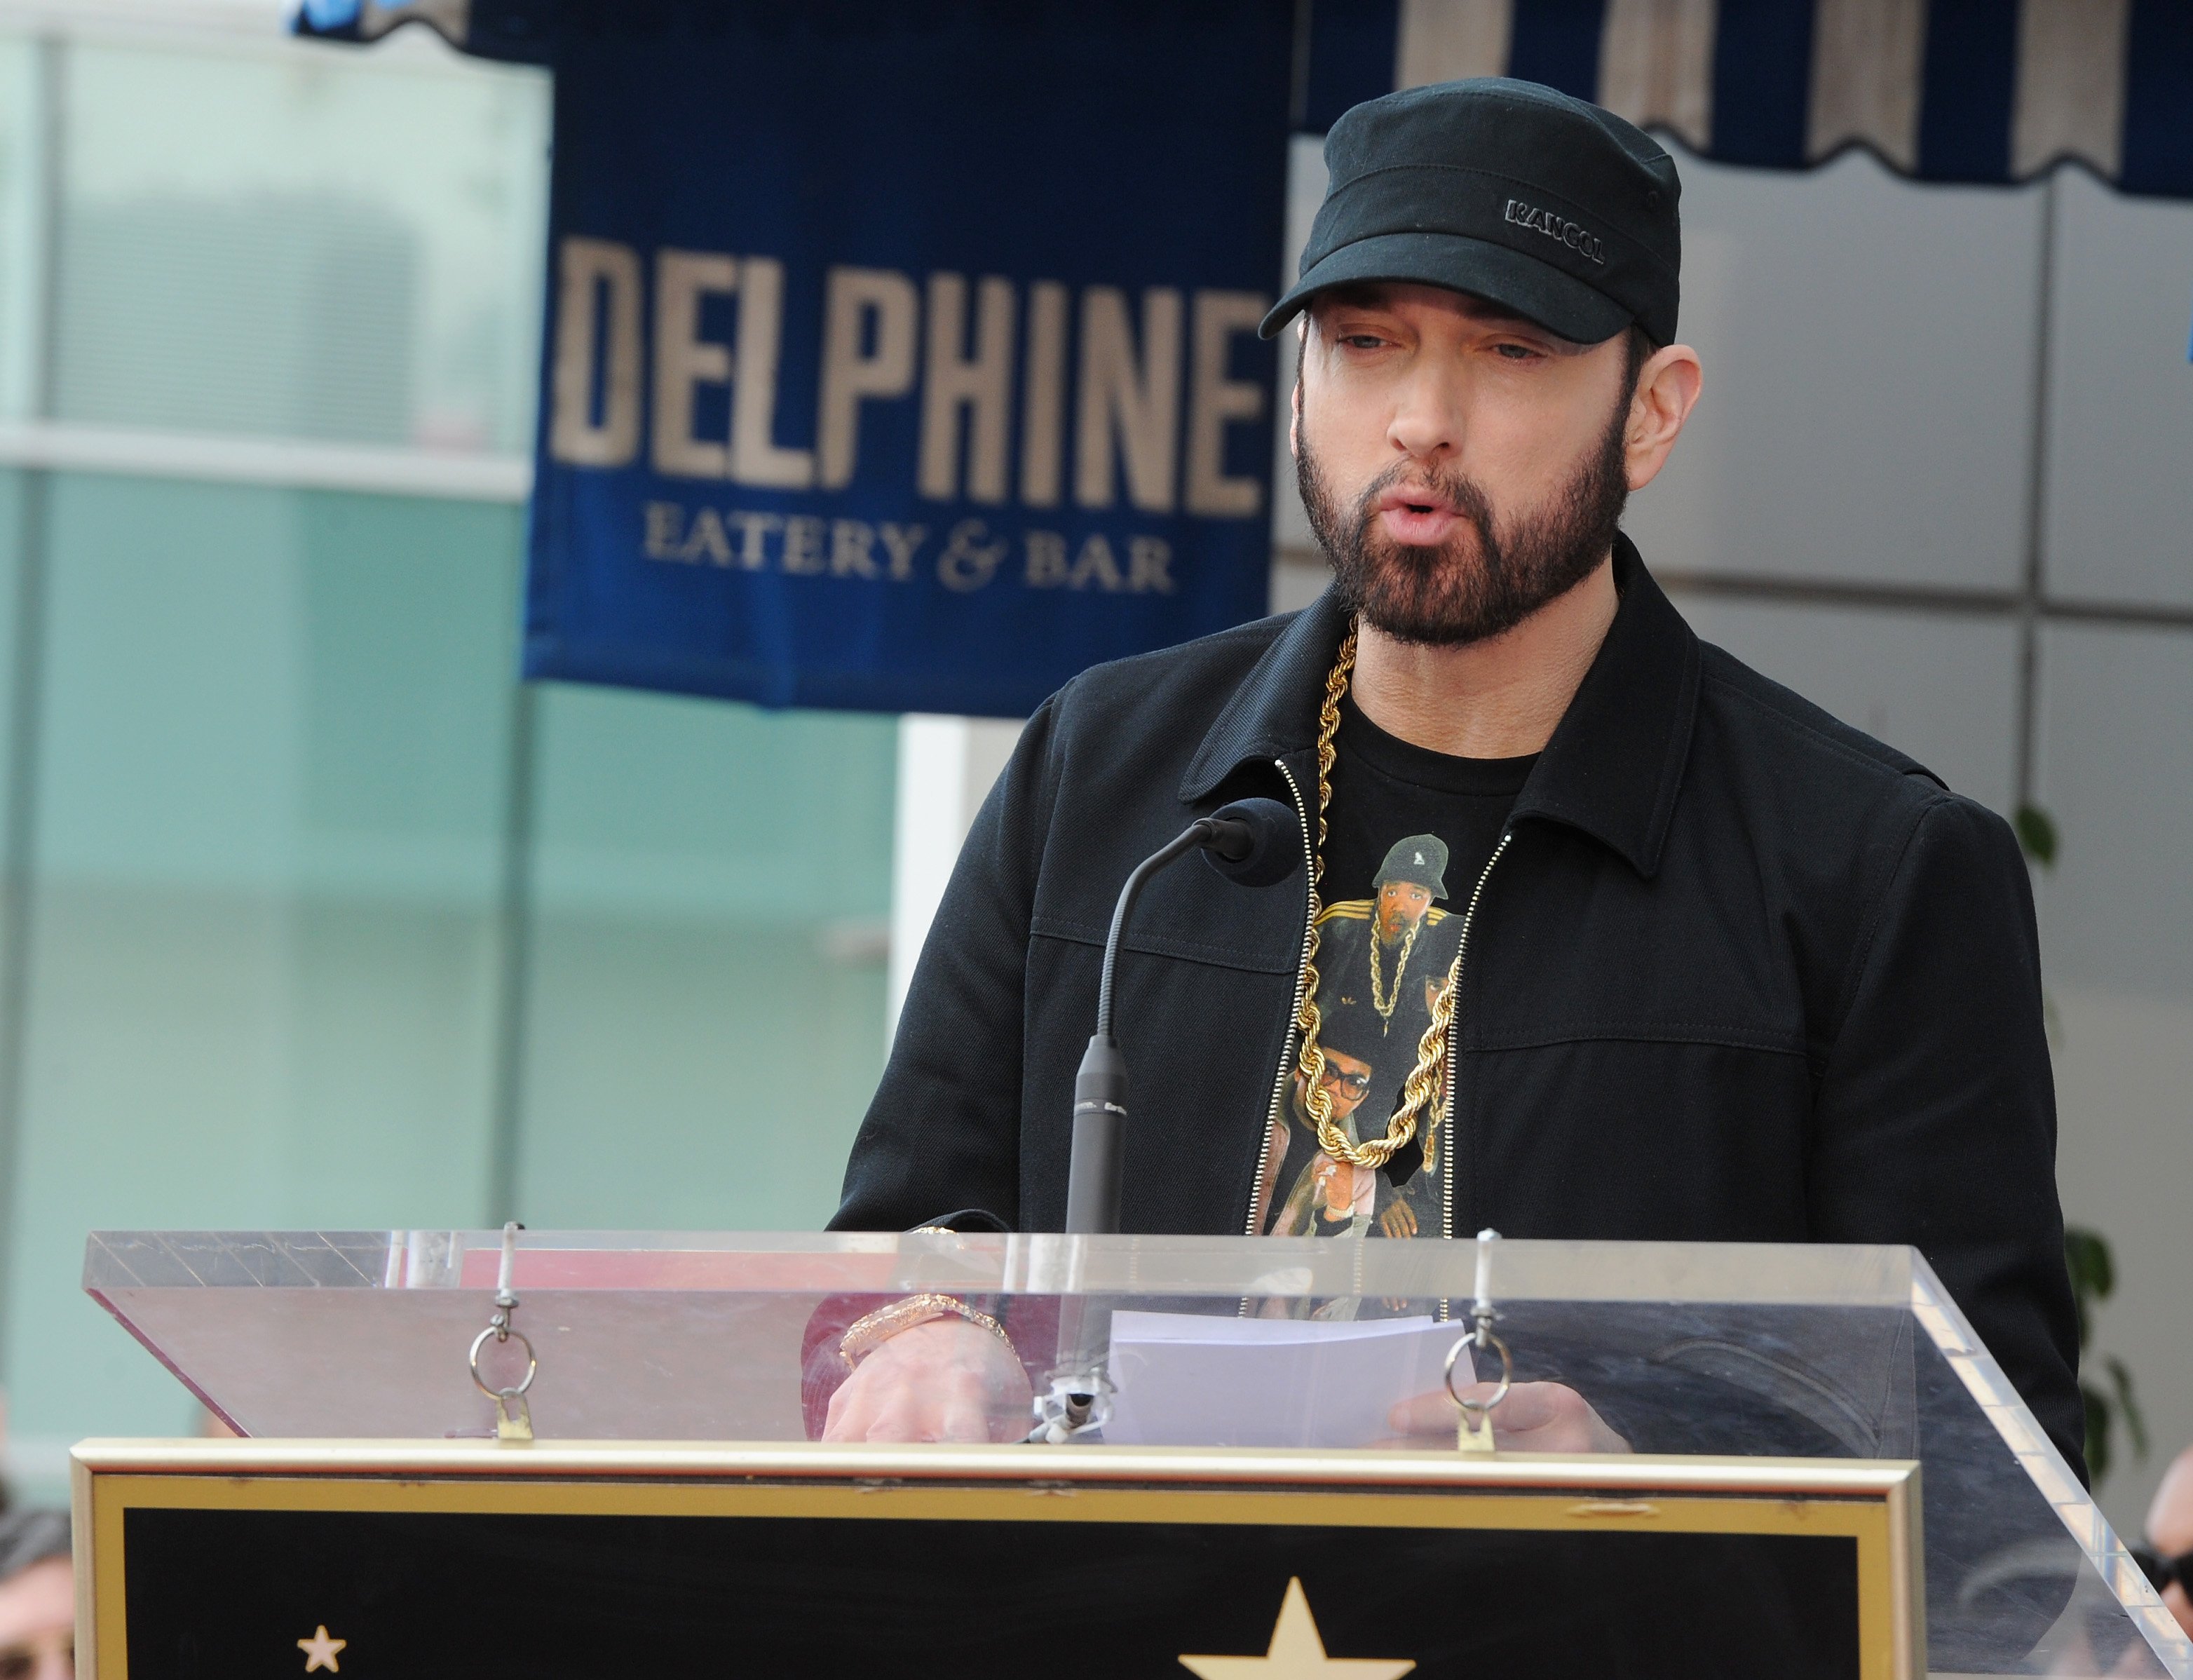 Eminem attends a ceremony honoring Curtis "50 Cent" Jackson with a star on the Hollywood Walk of Fame on January 30, 2020 in Hollywood, California. | Source: Getty Images